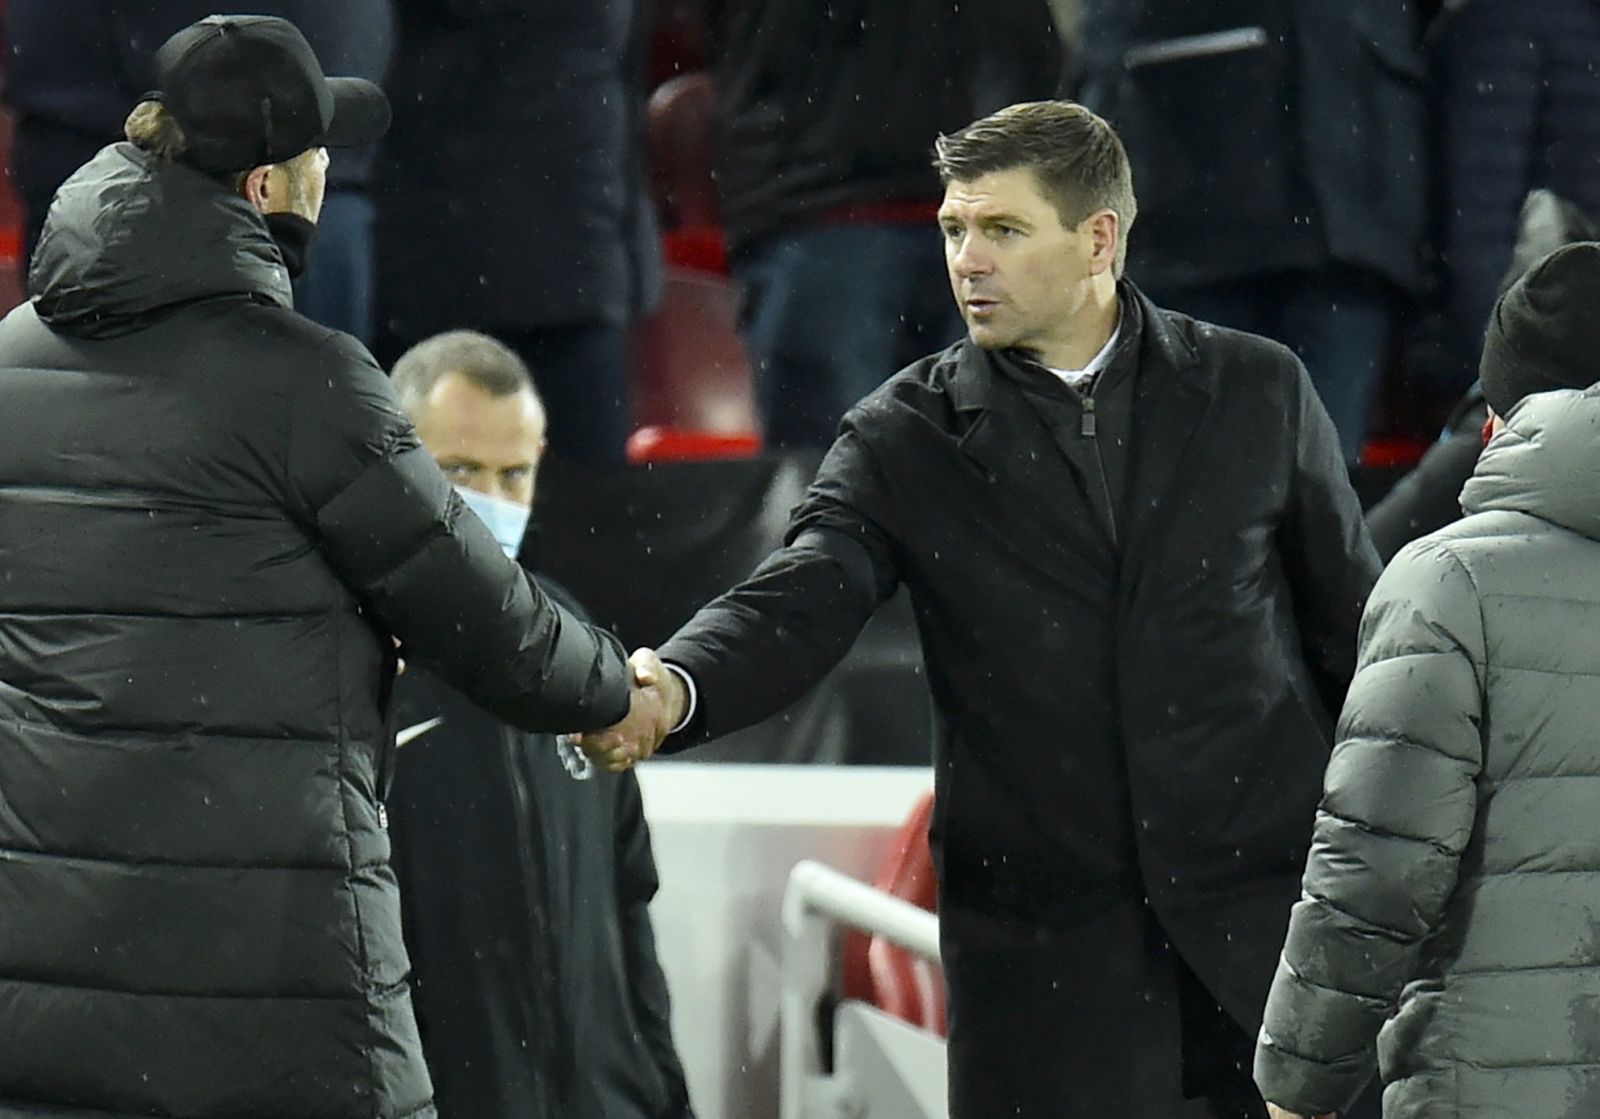 epa09636909 Aston Villa manager Steven Gerrard (R) greets Liverpool manager Jurgen Klopp (L) after the English Premier League match between Liverpool and Aston Villa in Liverpool, Britain, 11 December 2021.  EPA/PETER POWELL EDITORIAL USE ONLY. No use with unauthorized audio, video, data, fixture lists, club/league logos or 'live' services. Online in-match use limited to 120 images, no video emulation. No use in betting, games or single club/league/player publications